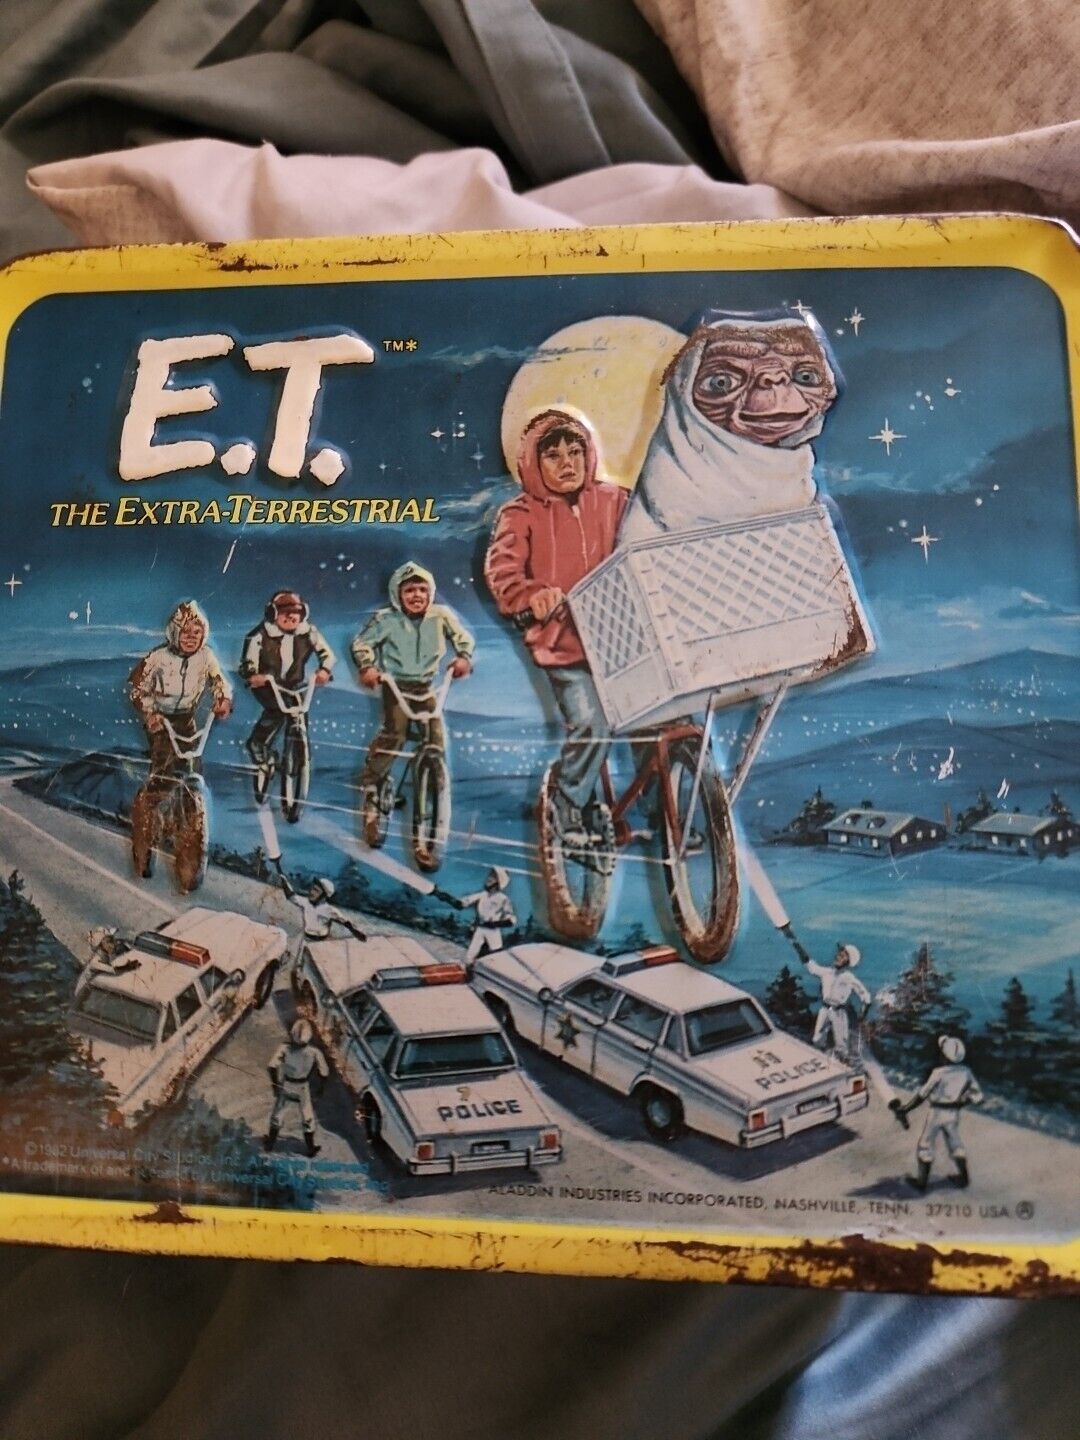 Vintage Aladdin E.T. the Extra-Terrestrial Metal Lunch Box 1982 - No Thermos